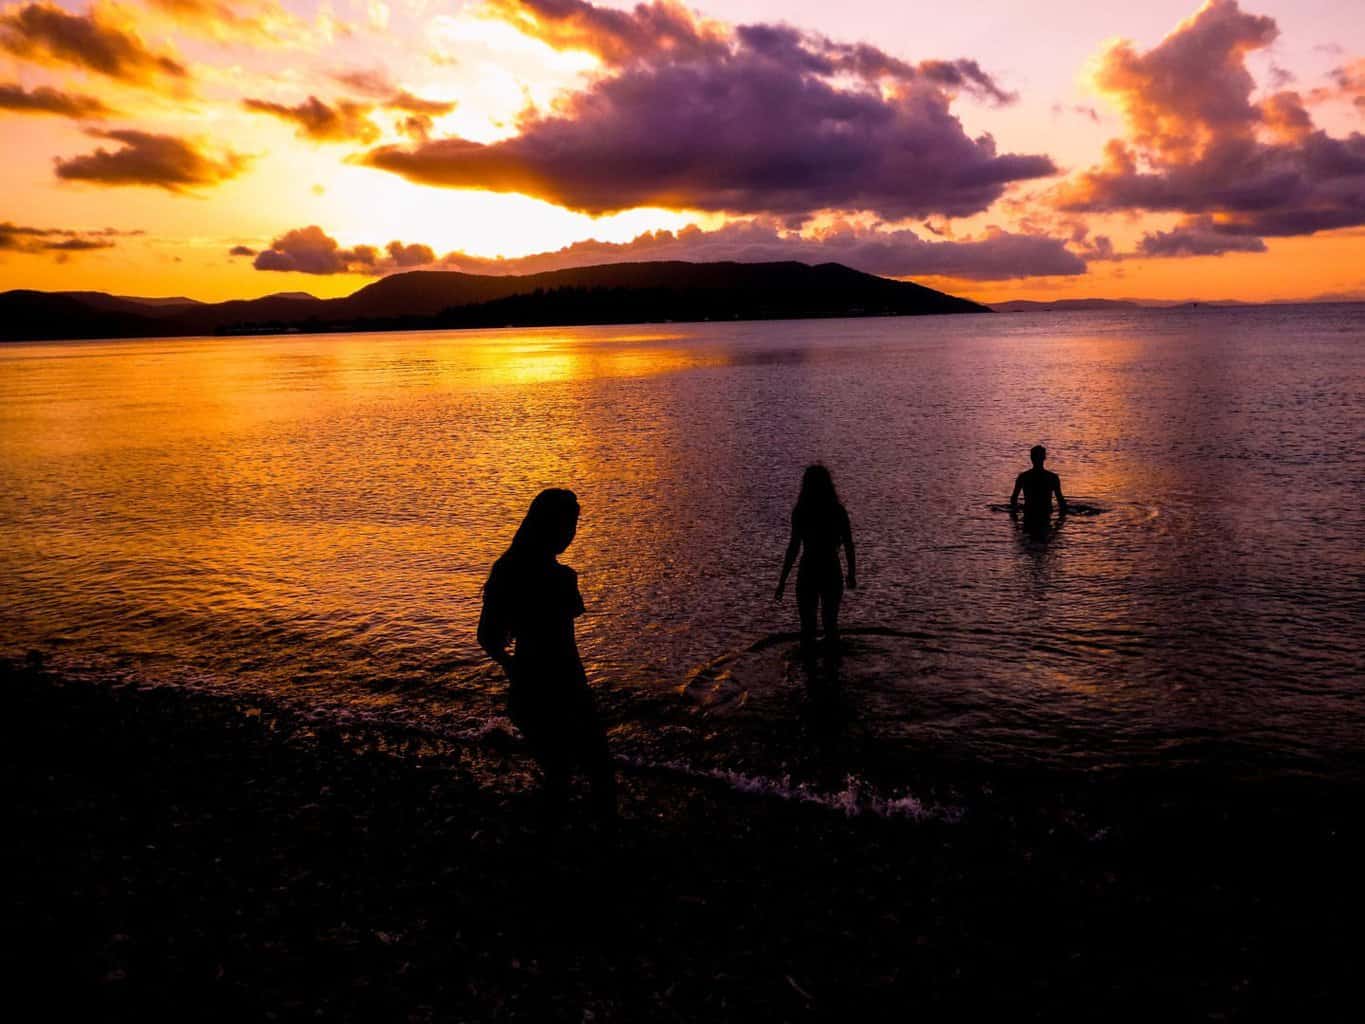 Sunset in the Whitsundays on an Australia East Coast road trip itinerary